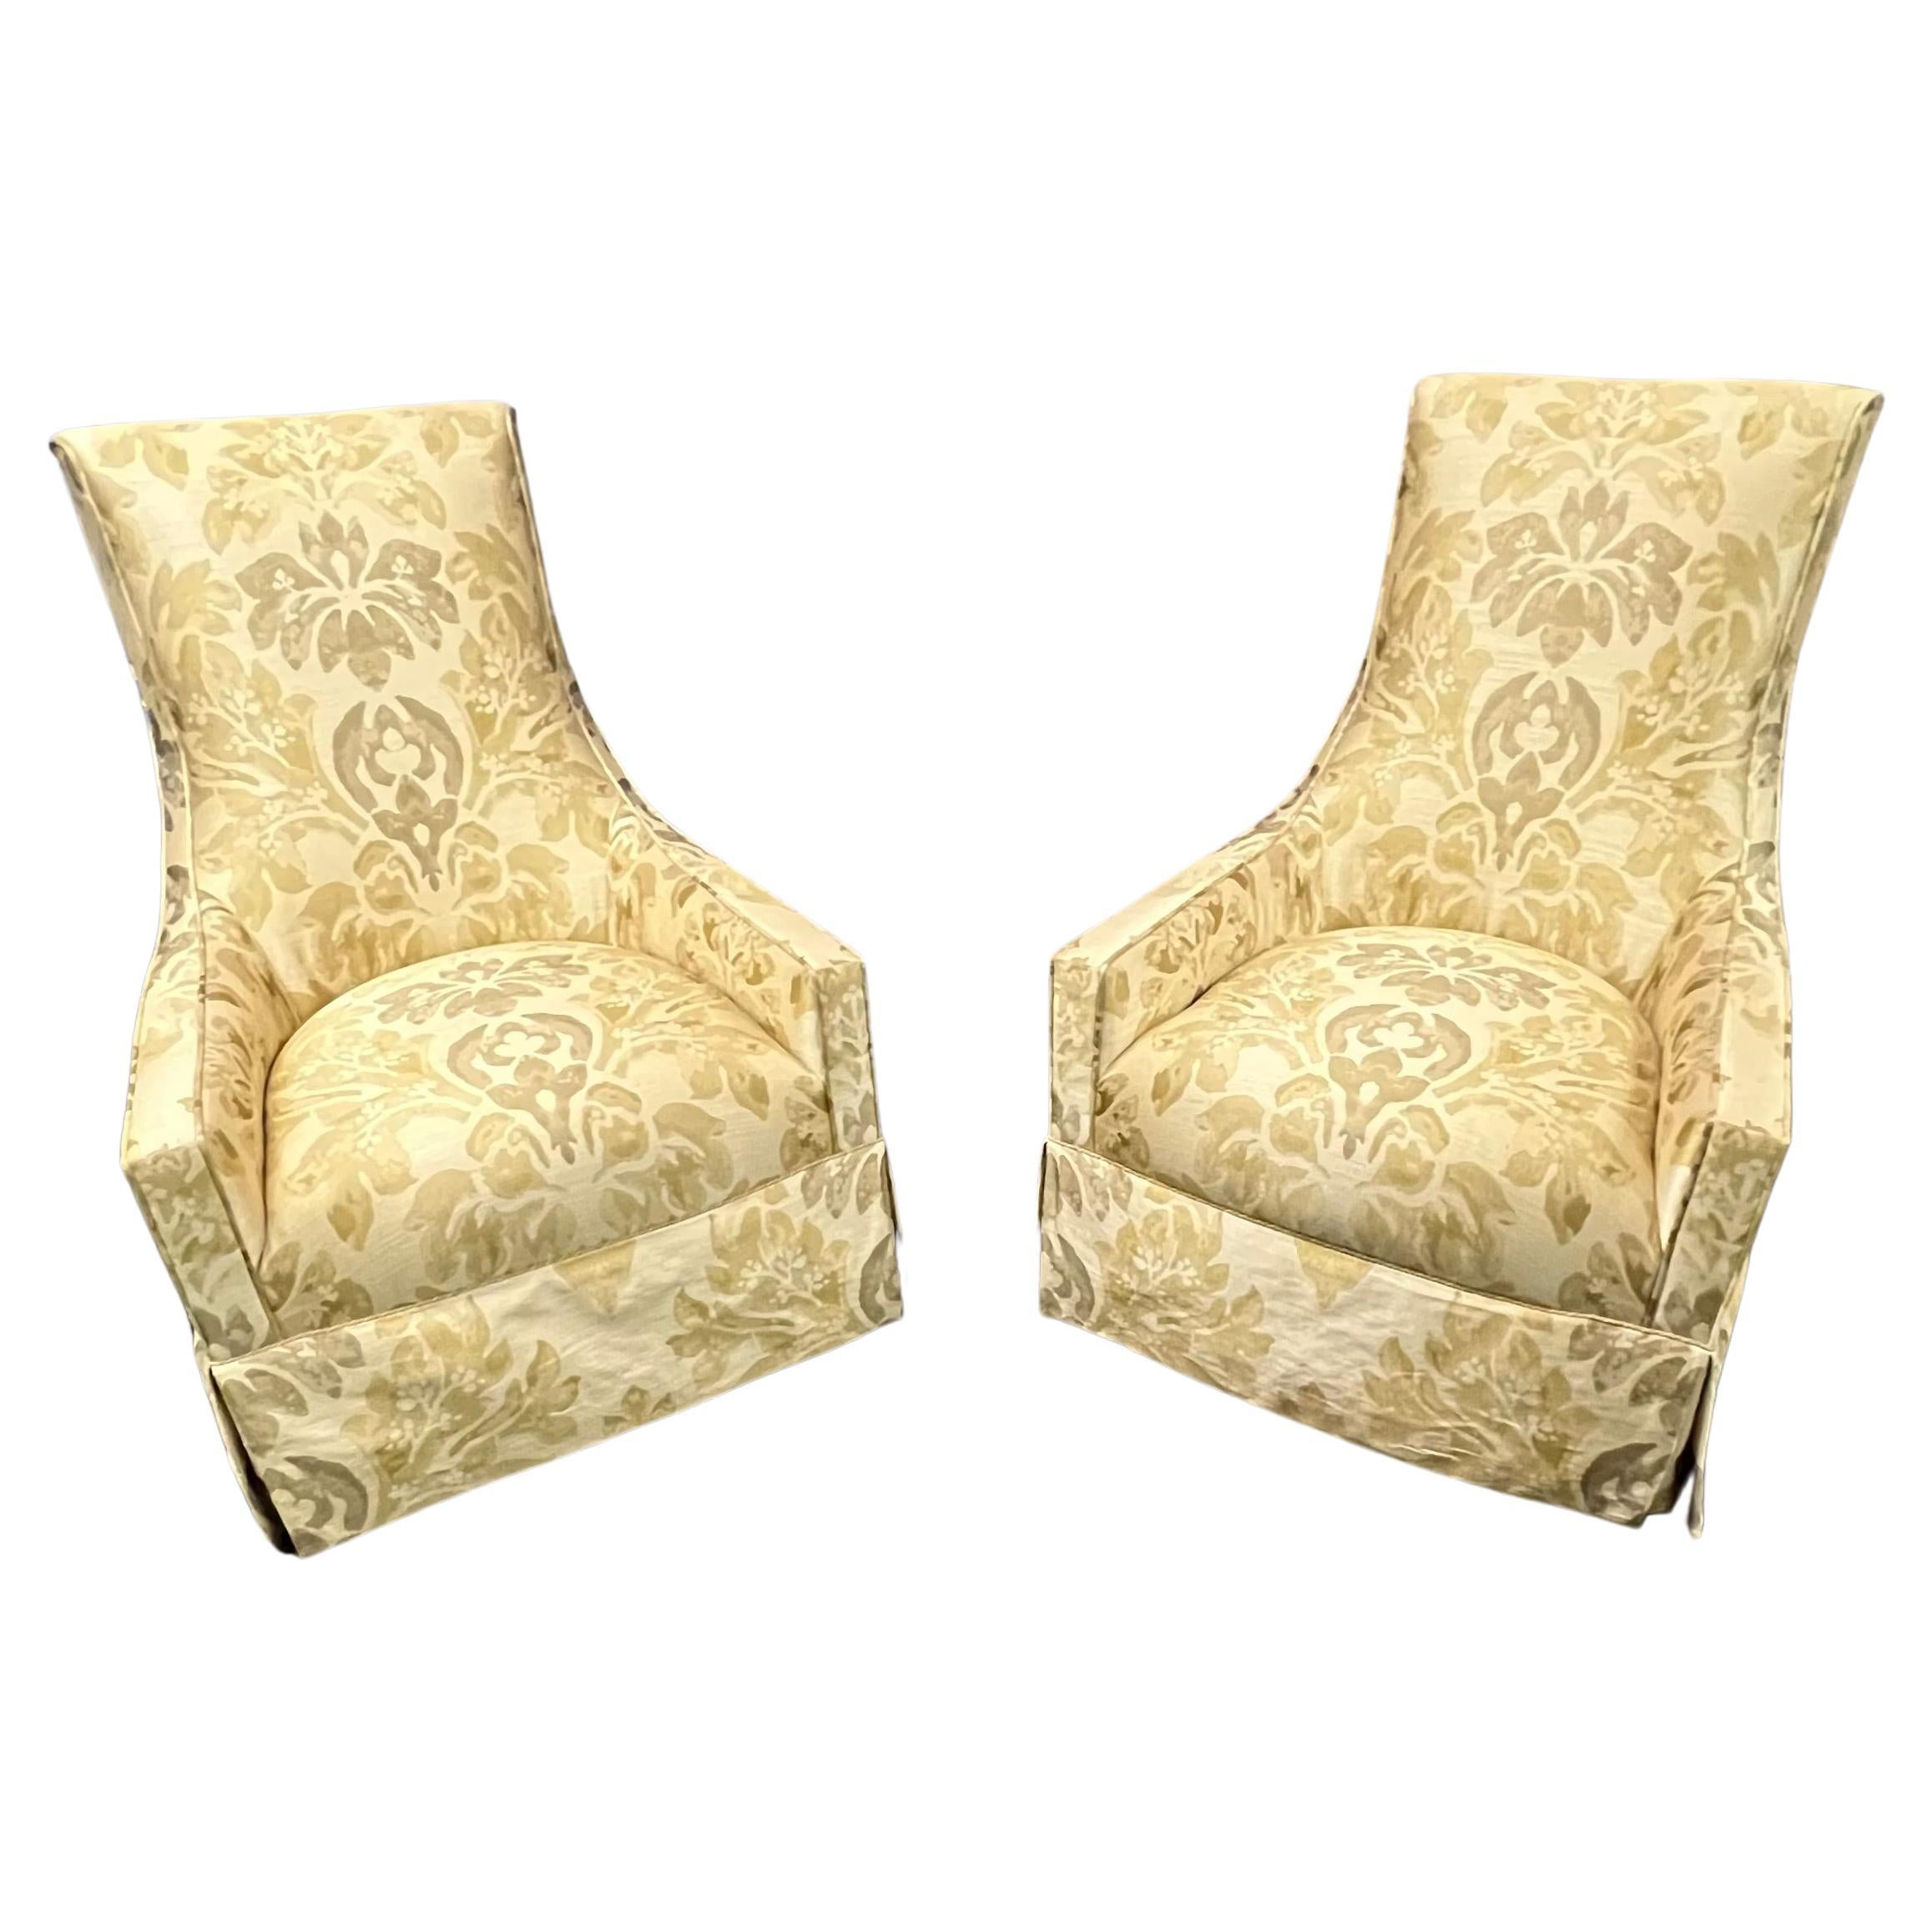 Pair of Hollywood Regency Mid-Century High Back Upholstered Lounge Chairs